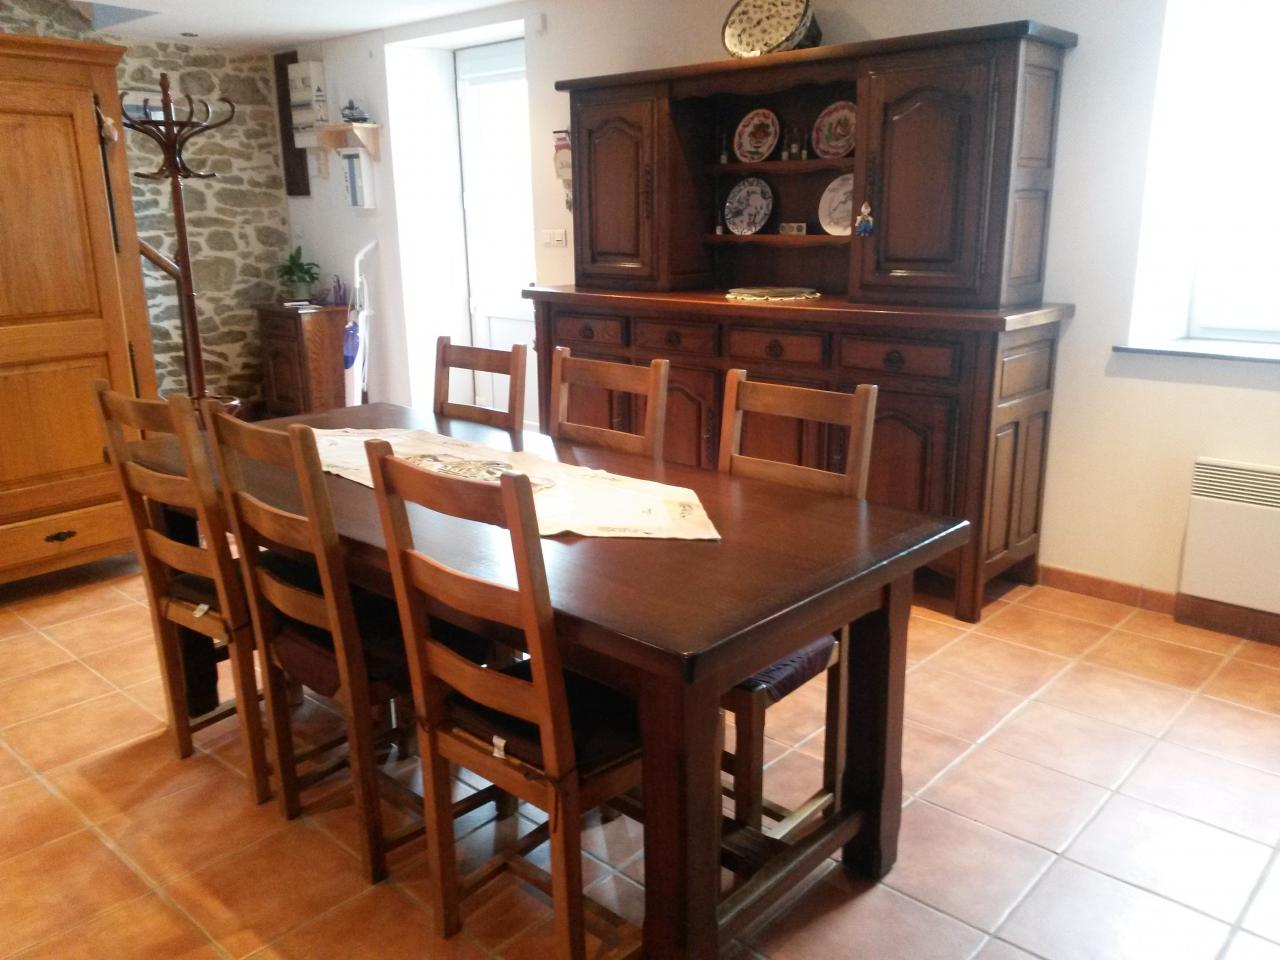 The kitchen / dining room